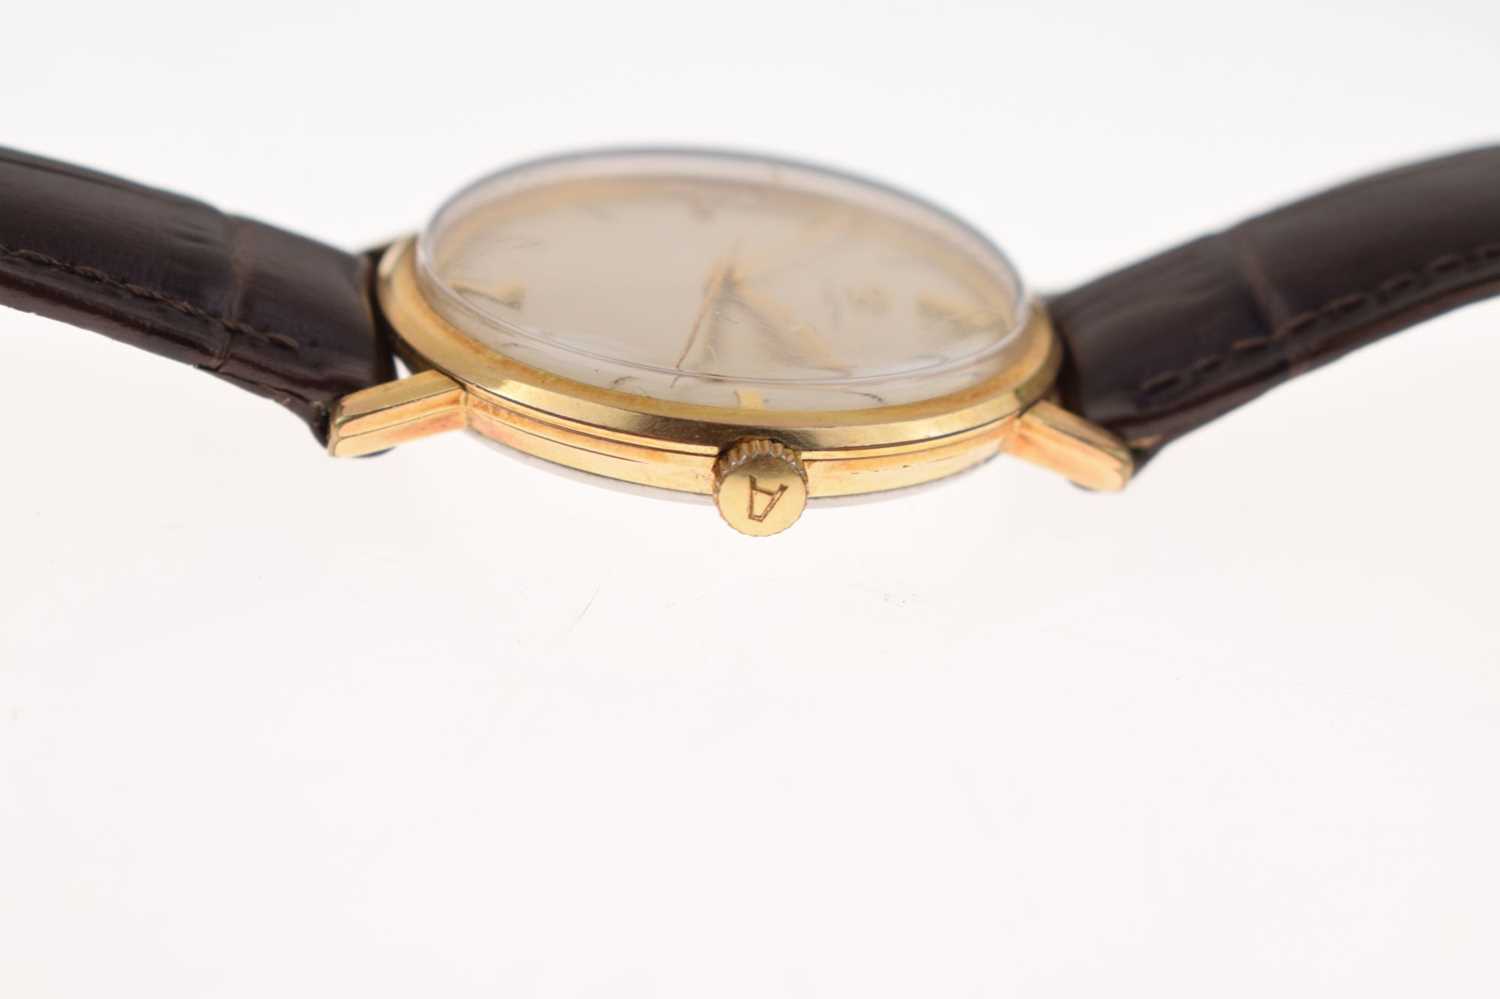 Omega - Gentleman's gold plated wristwatch - Image 4 of 8